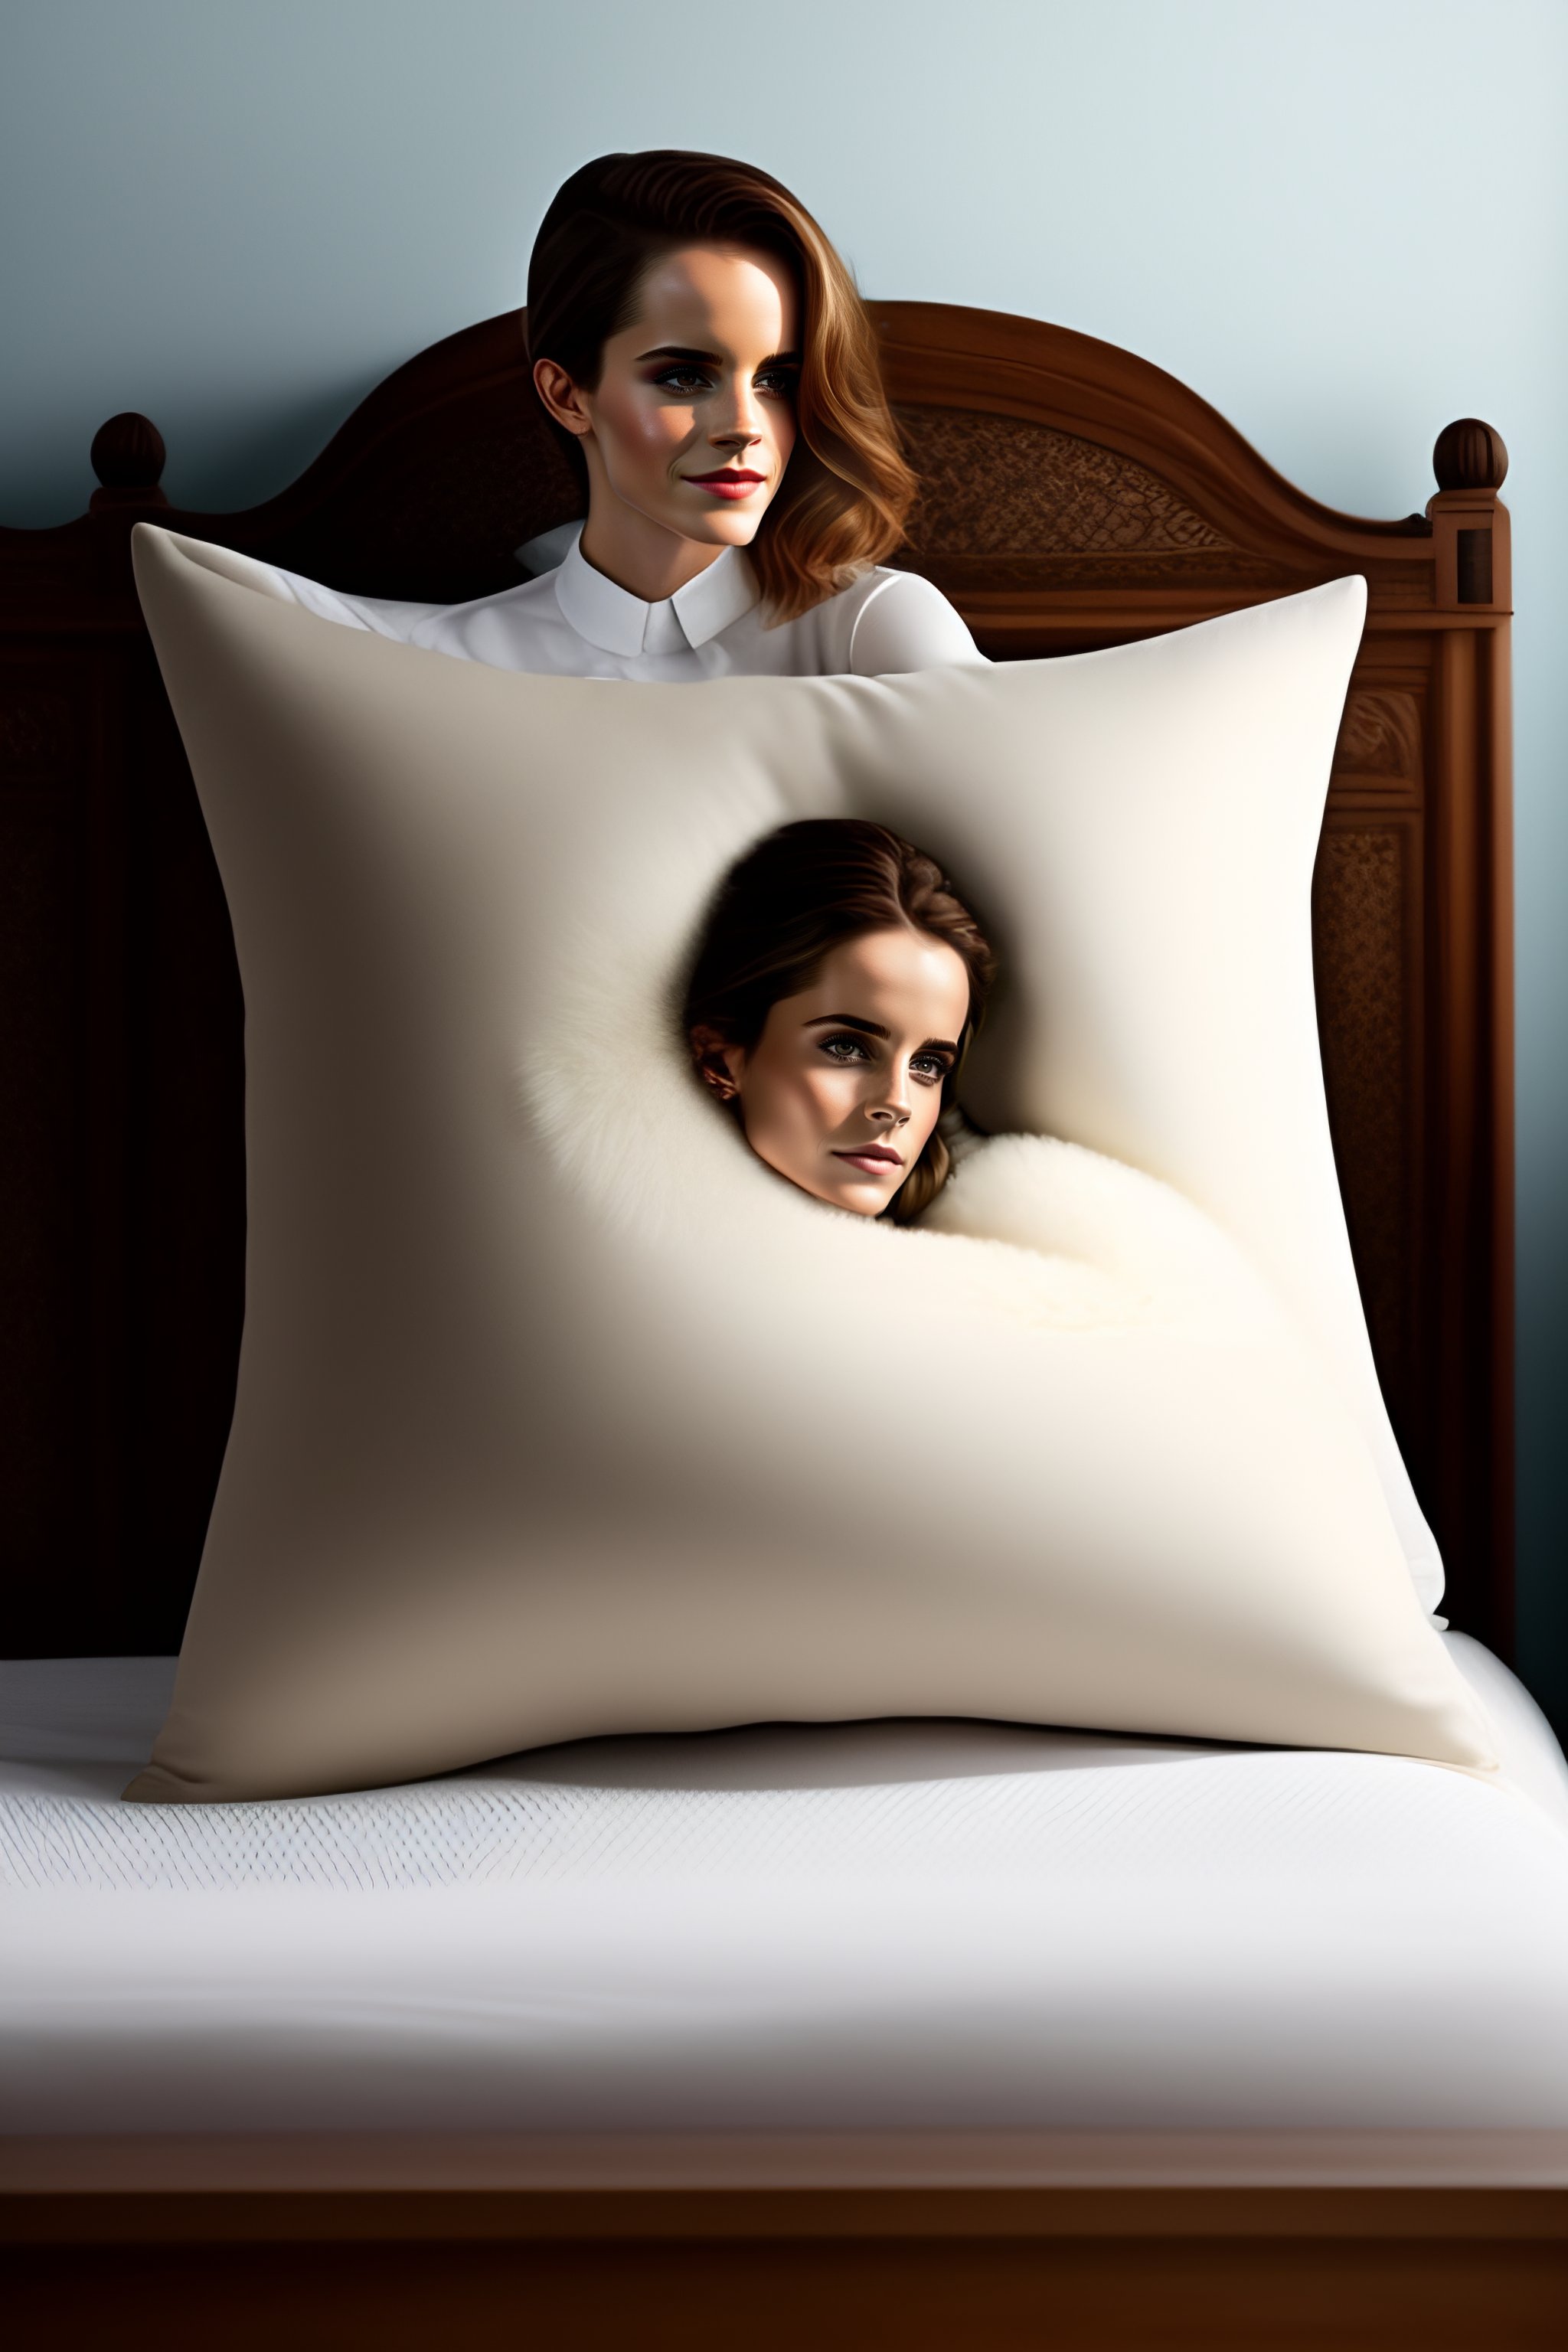 Lexica - Emma watson riding her pillow, on all